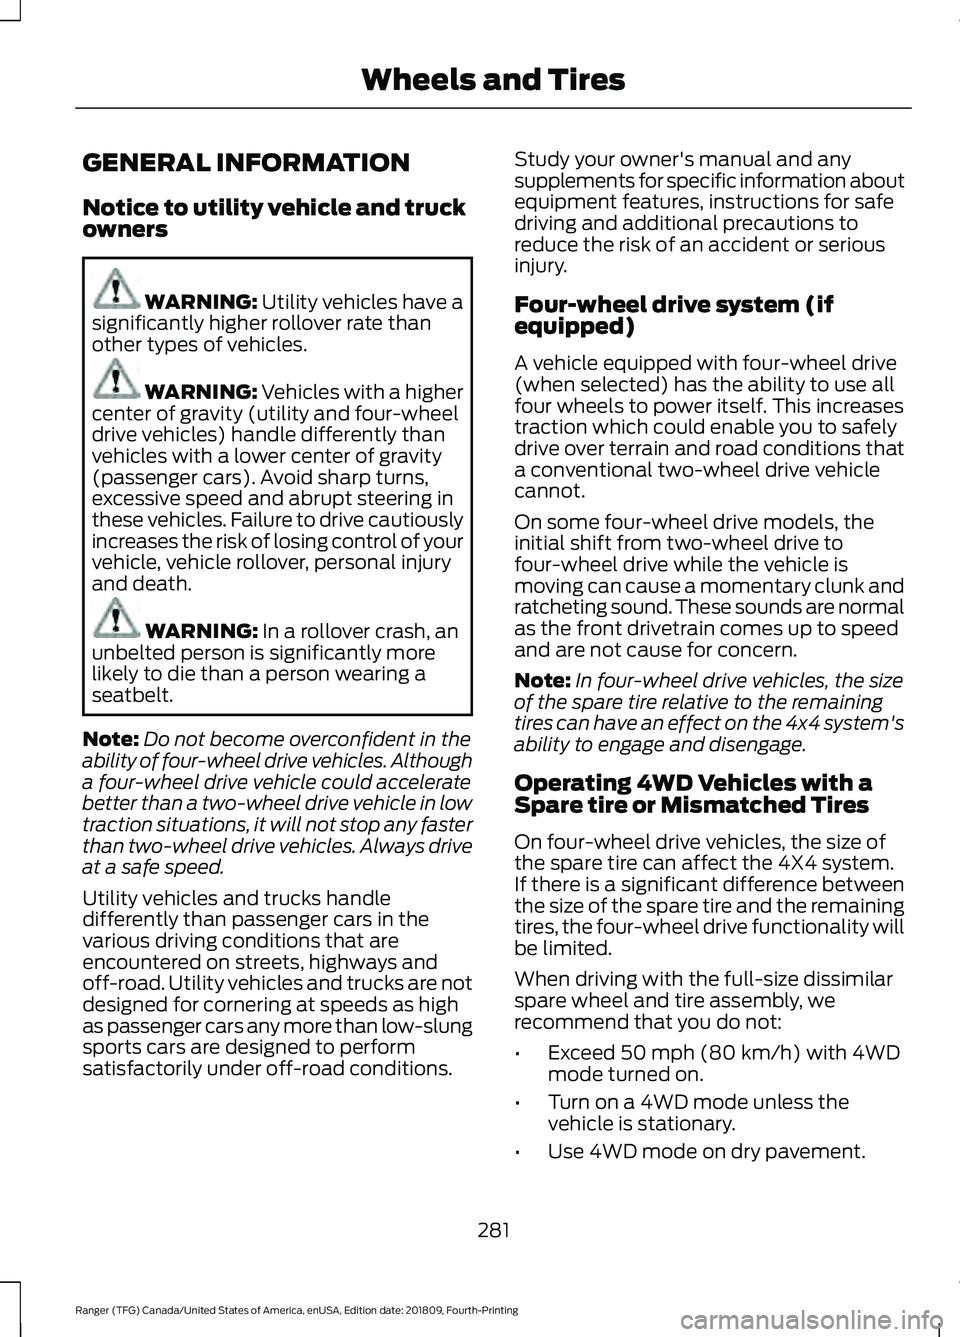 FORD RANGER 2019 User Guide GENERAL INFORMATION
Notice to utility vehicle and truck
owners
WARNING: Utility vehicles have a
significantly higher rollover rate than
other types of vehicles. WARNING: Vehicles with a higher
center 